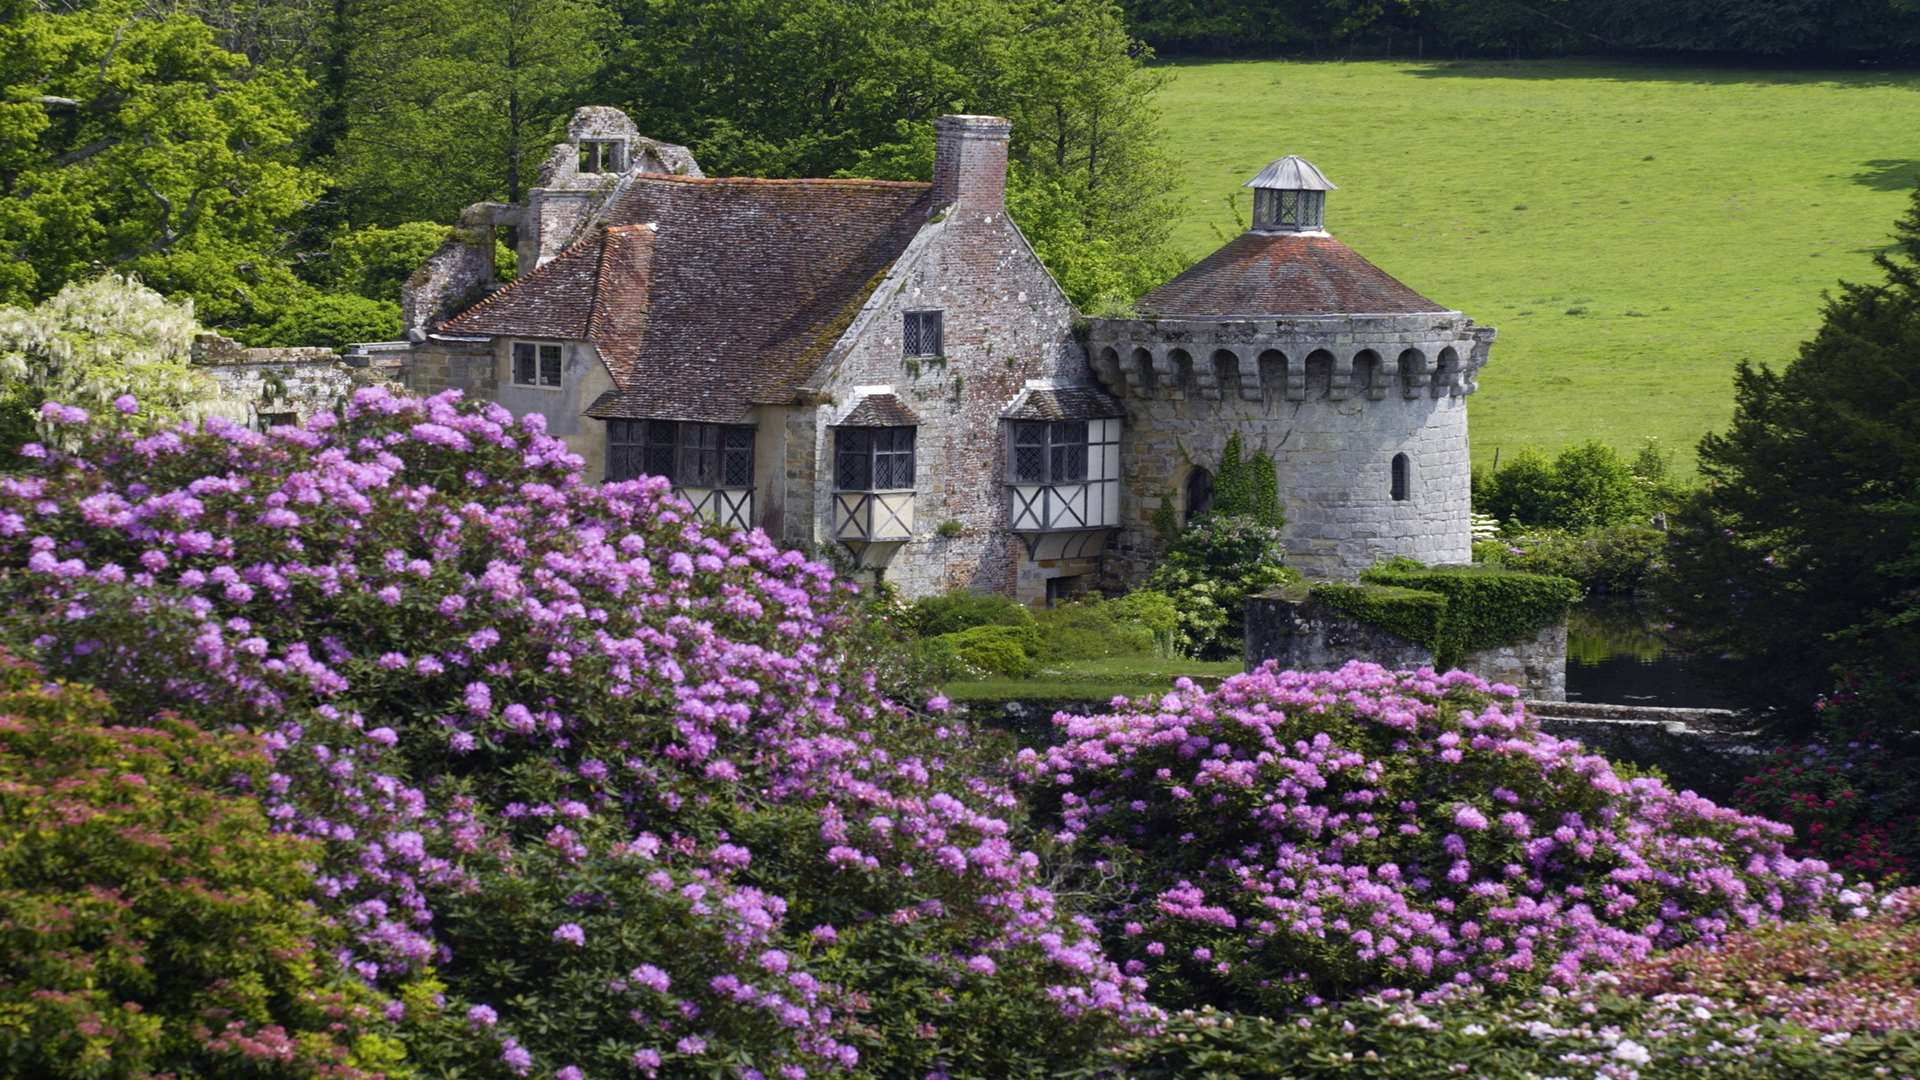 The National Trust's Scotney Castle